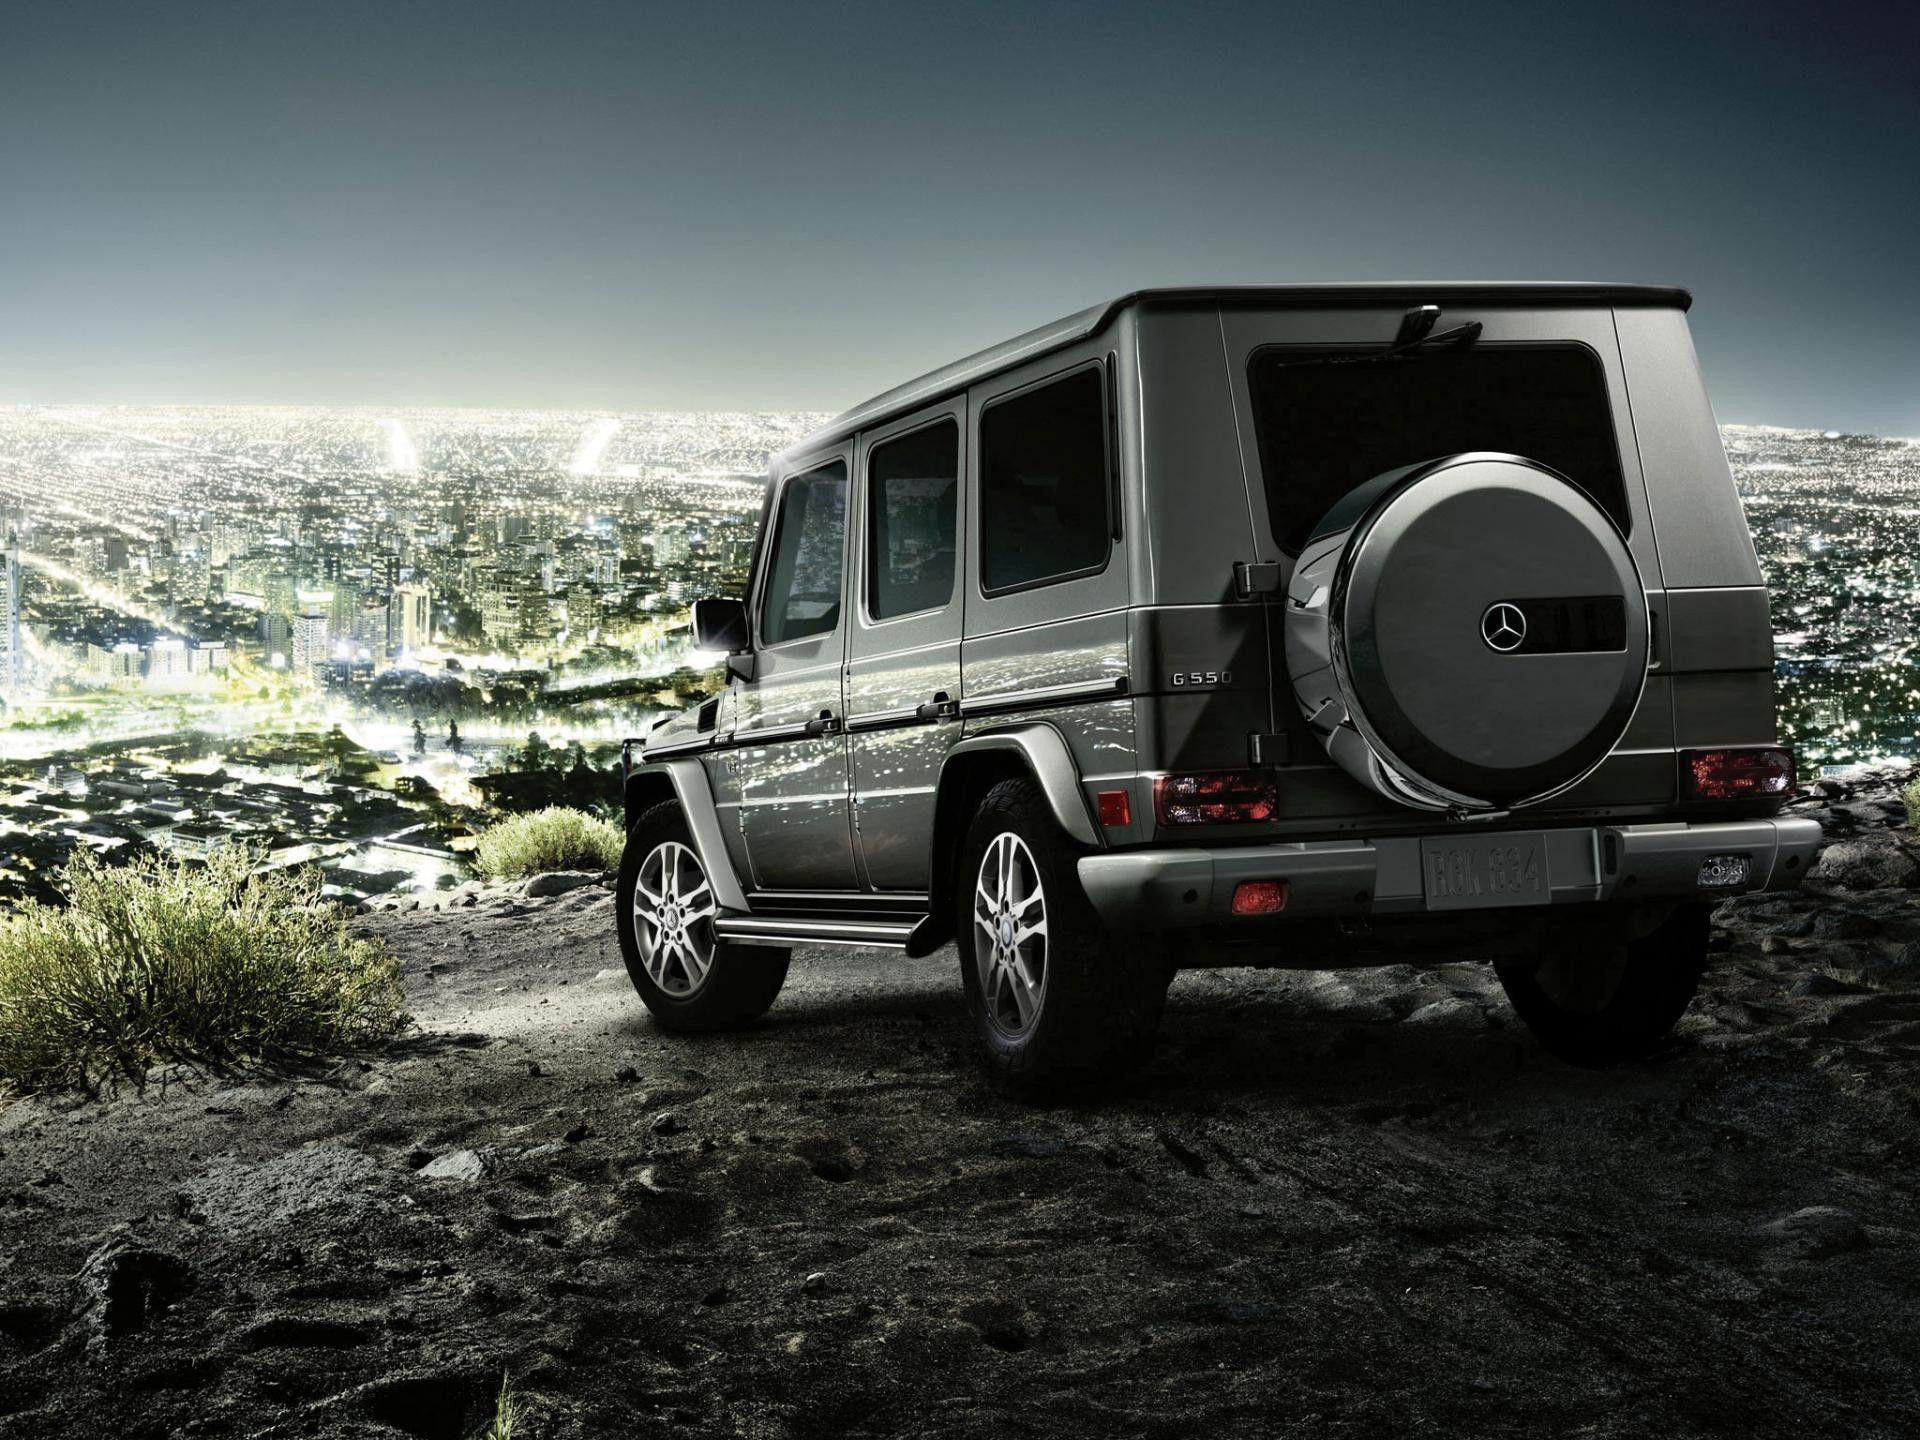 Mercedes Benz G Class Wallpaper Picture to